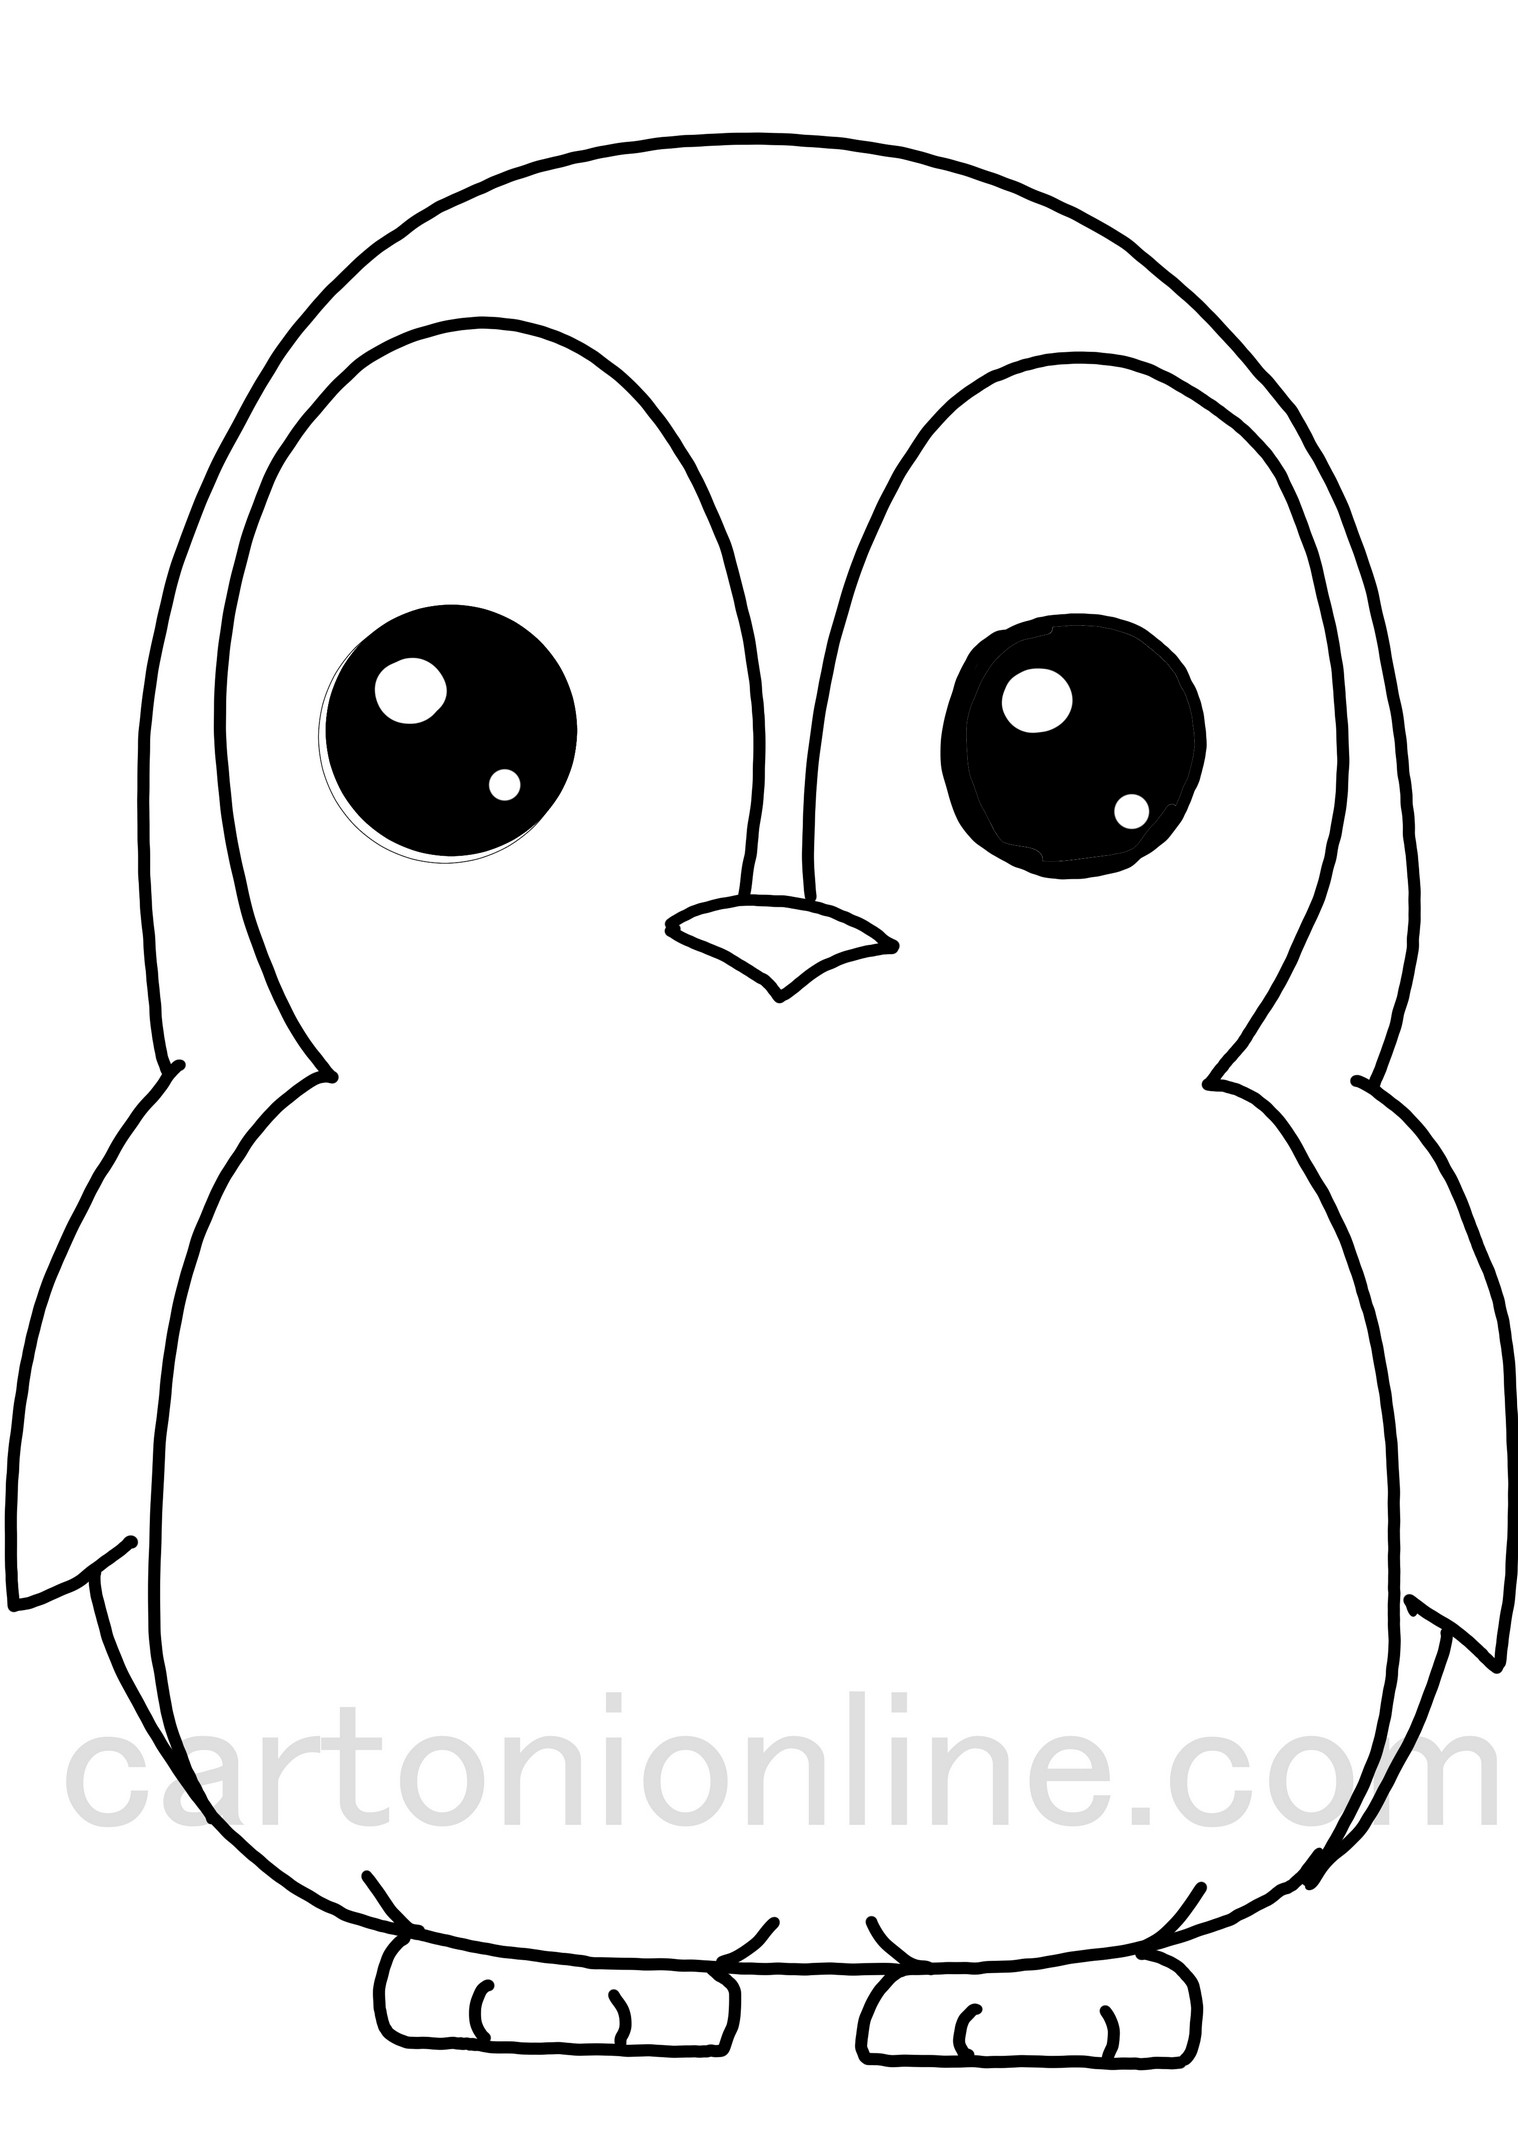 Kawaii penguin coloring page for kids